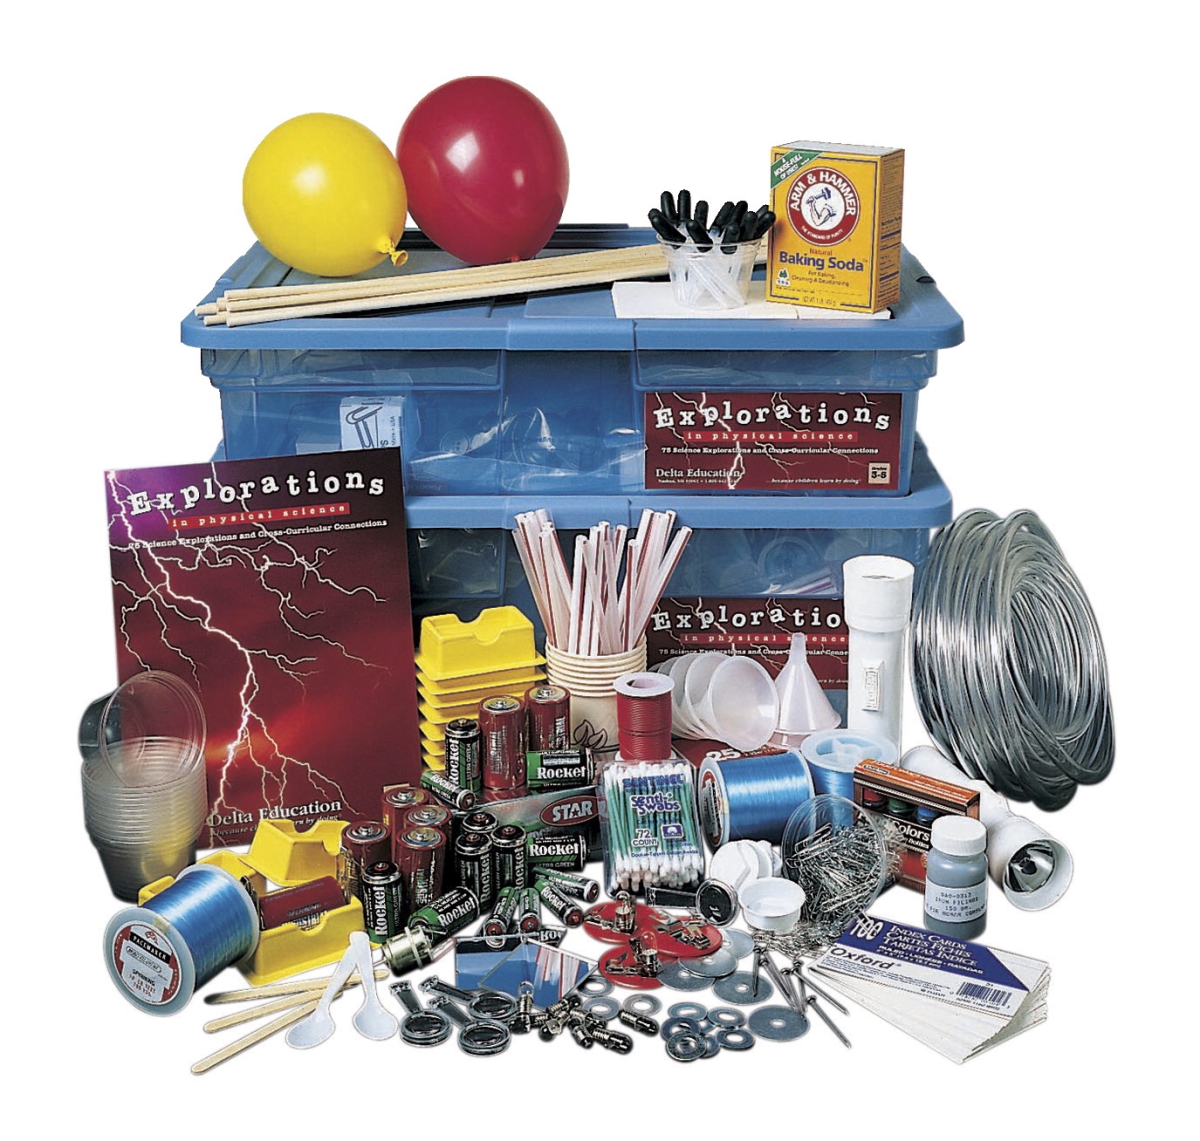 110-3630 Explorations In Physical Science Kit